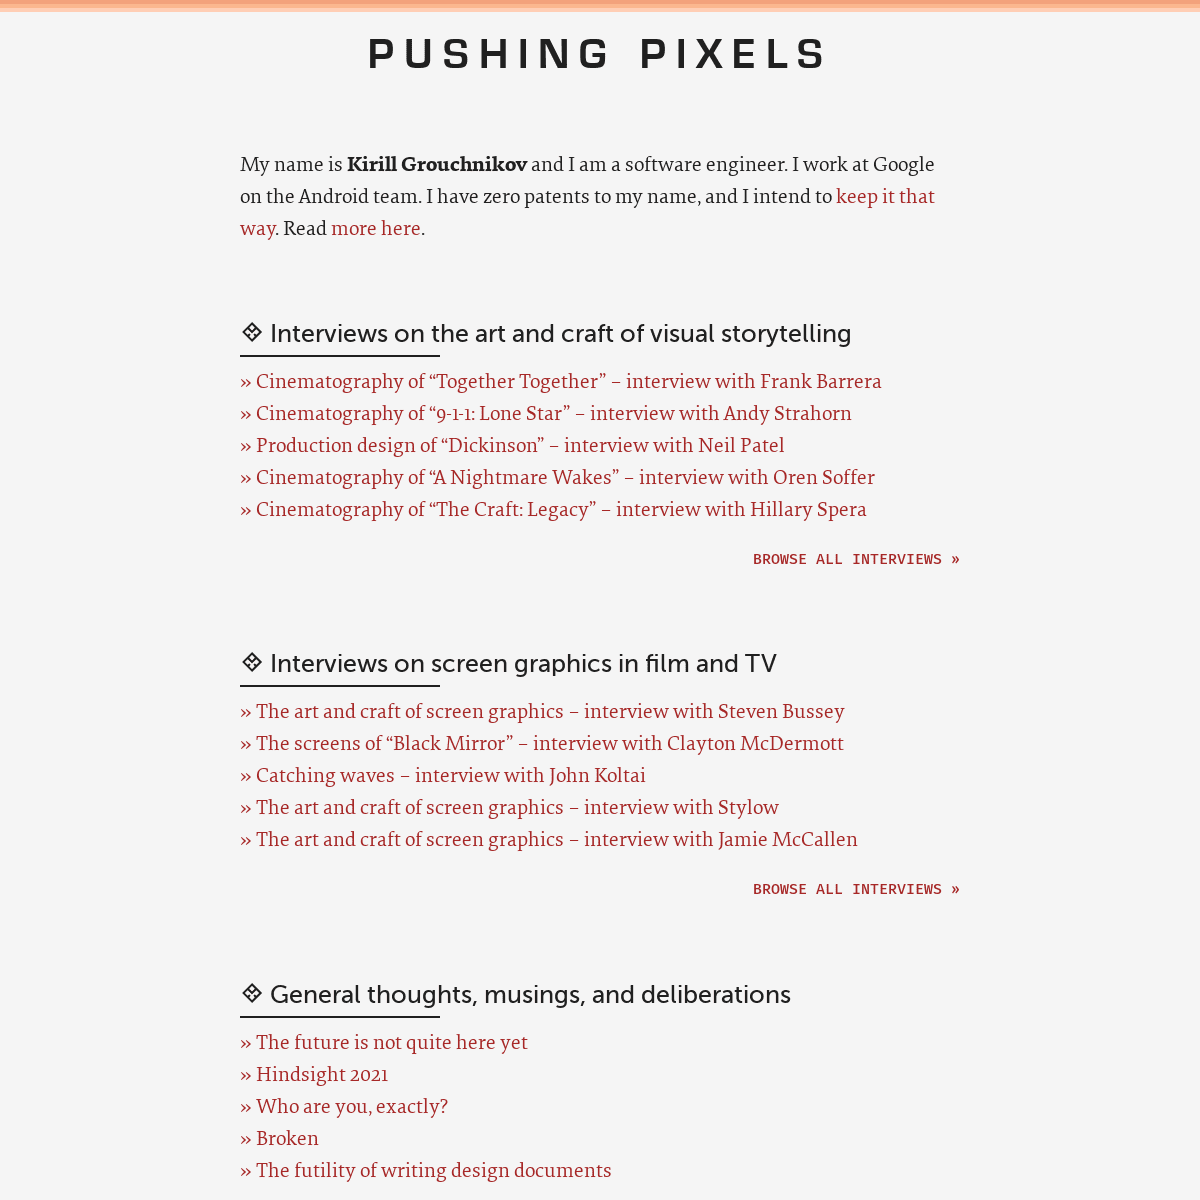 A complete backup of https://pushing-pixels.org